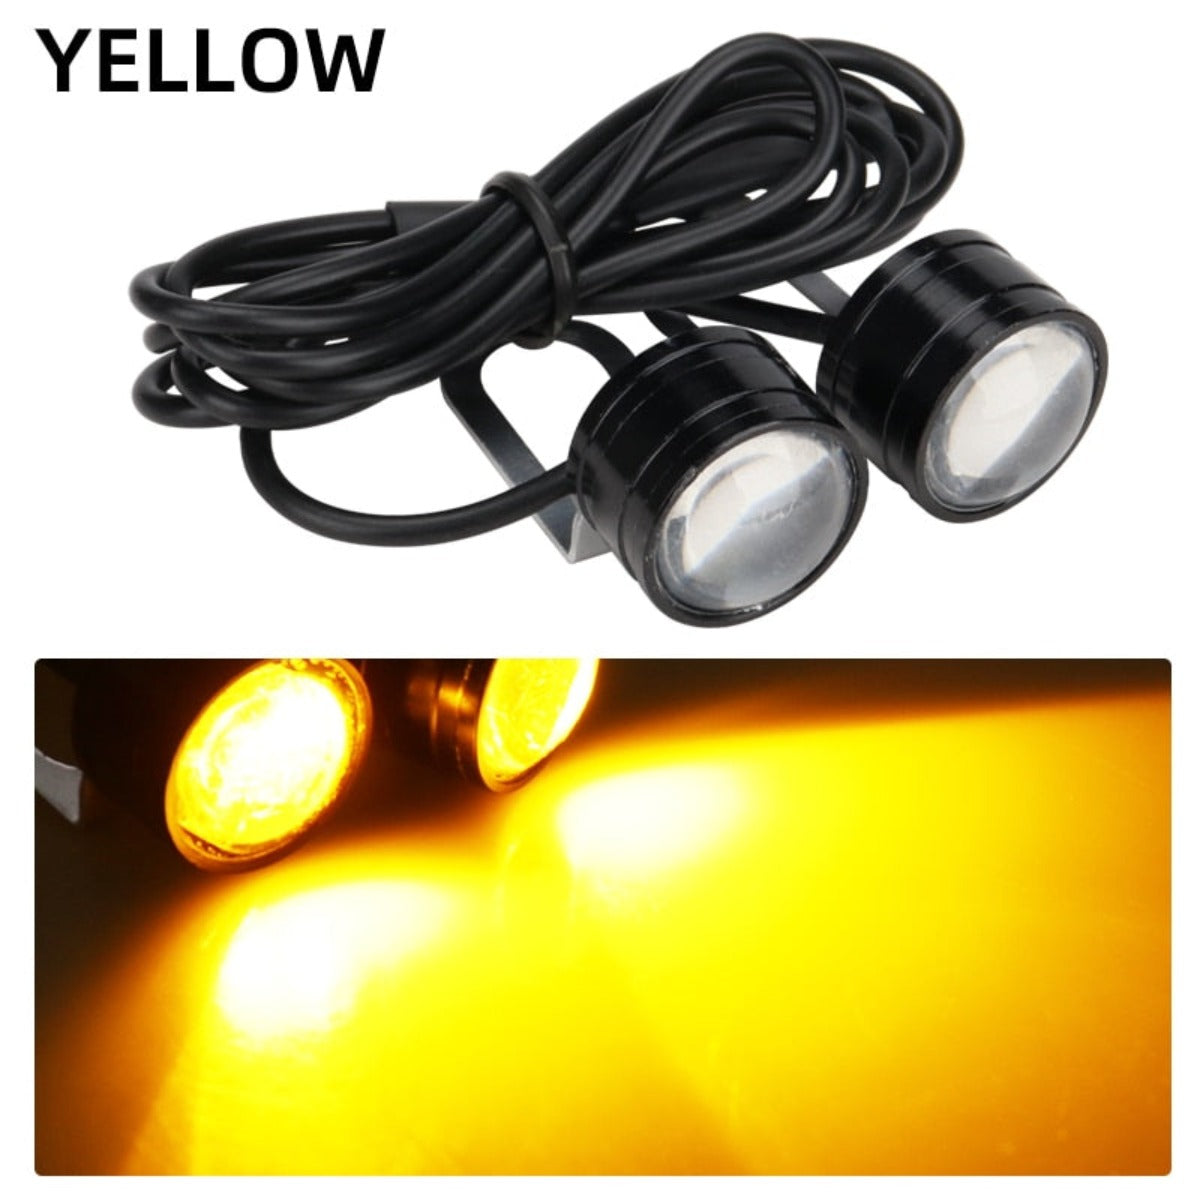 Enhance motorcycle visibility with two Motorcycle Strobe LED Driving Lights.